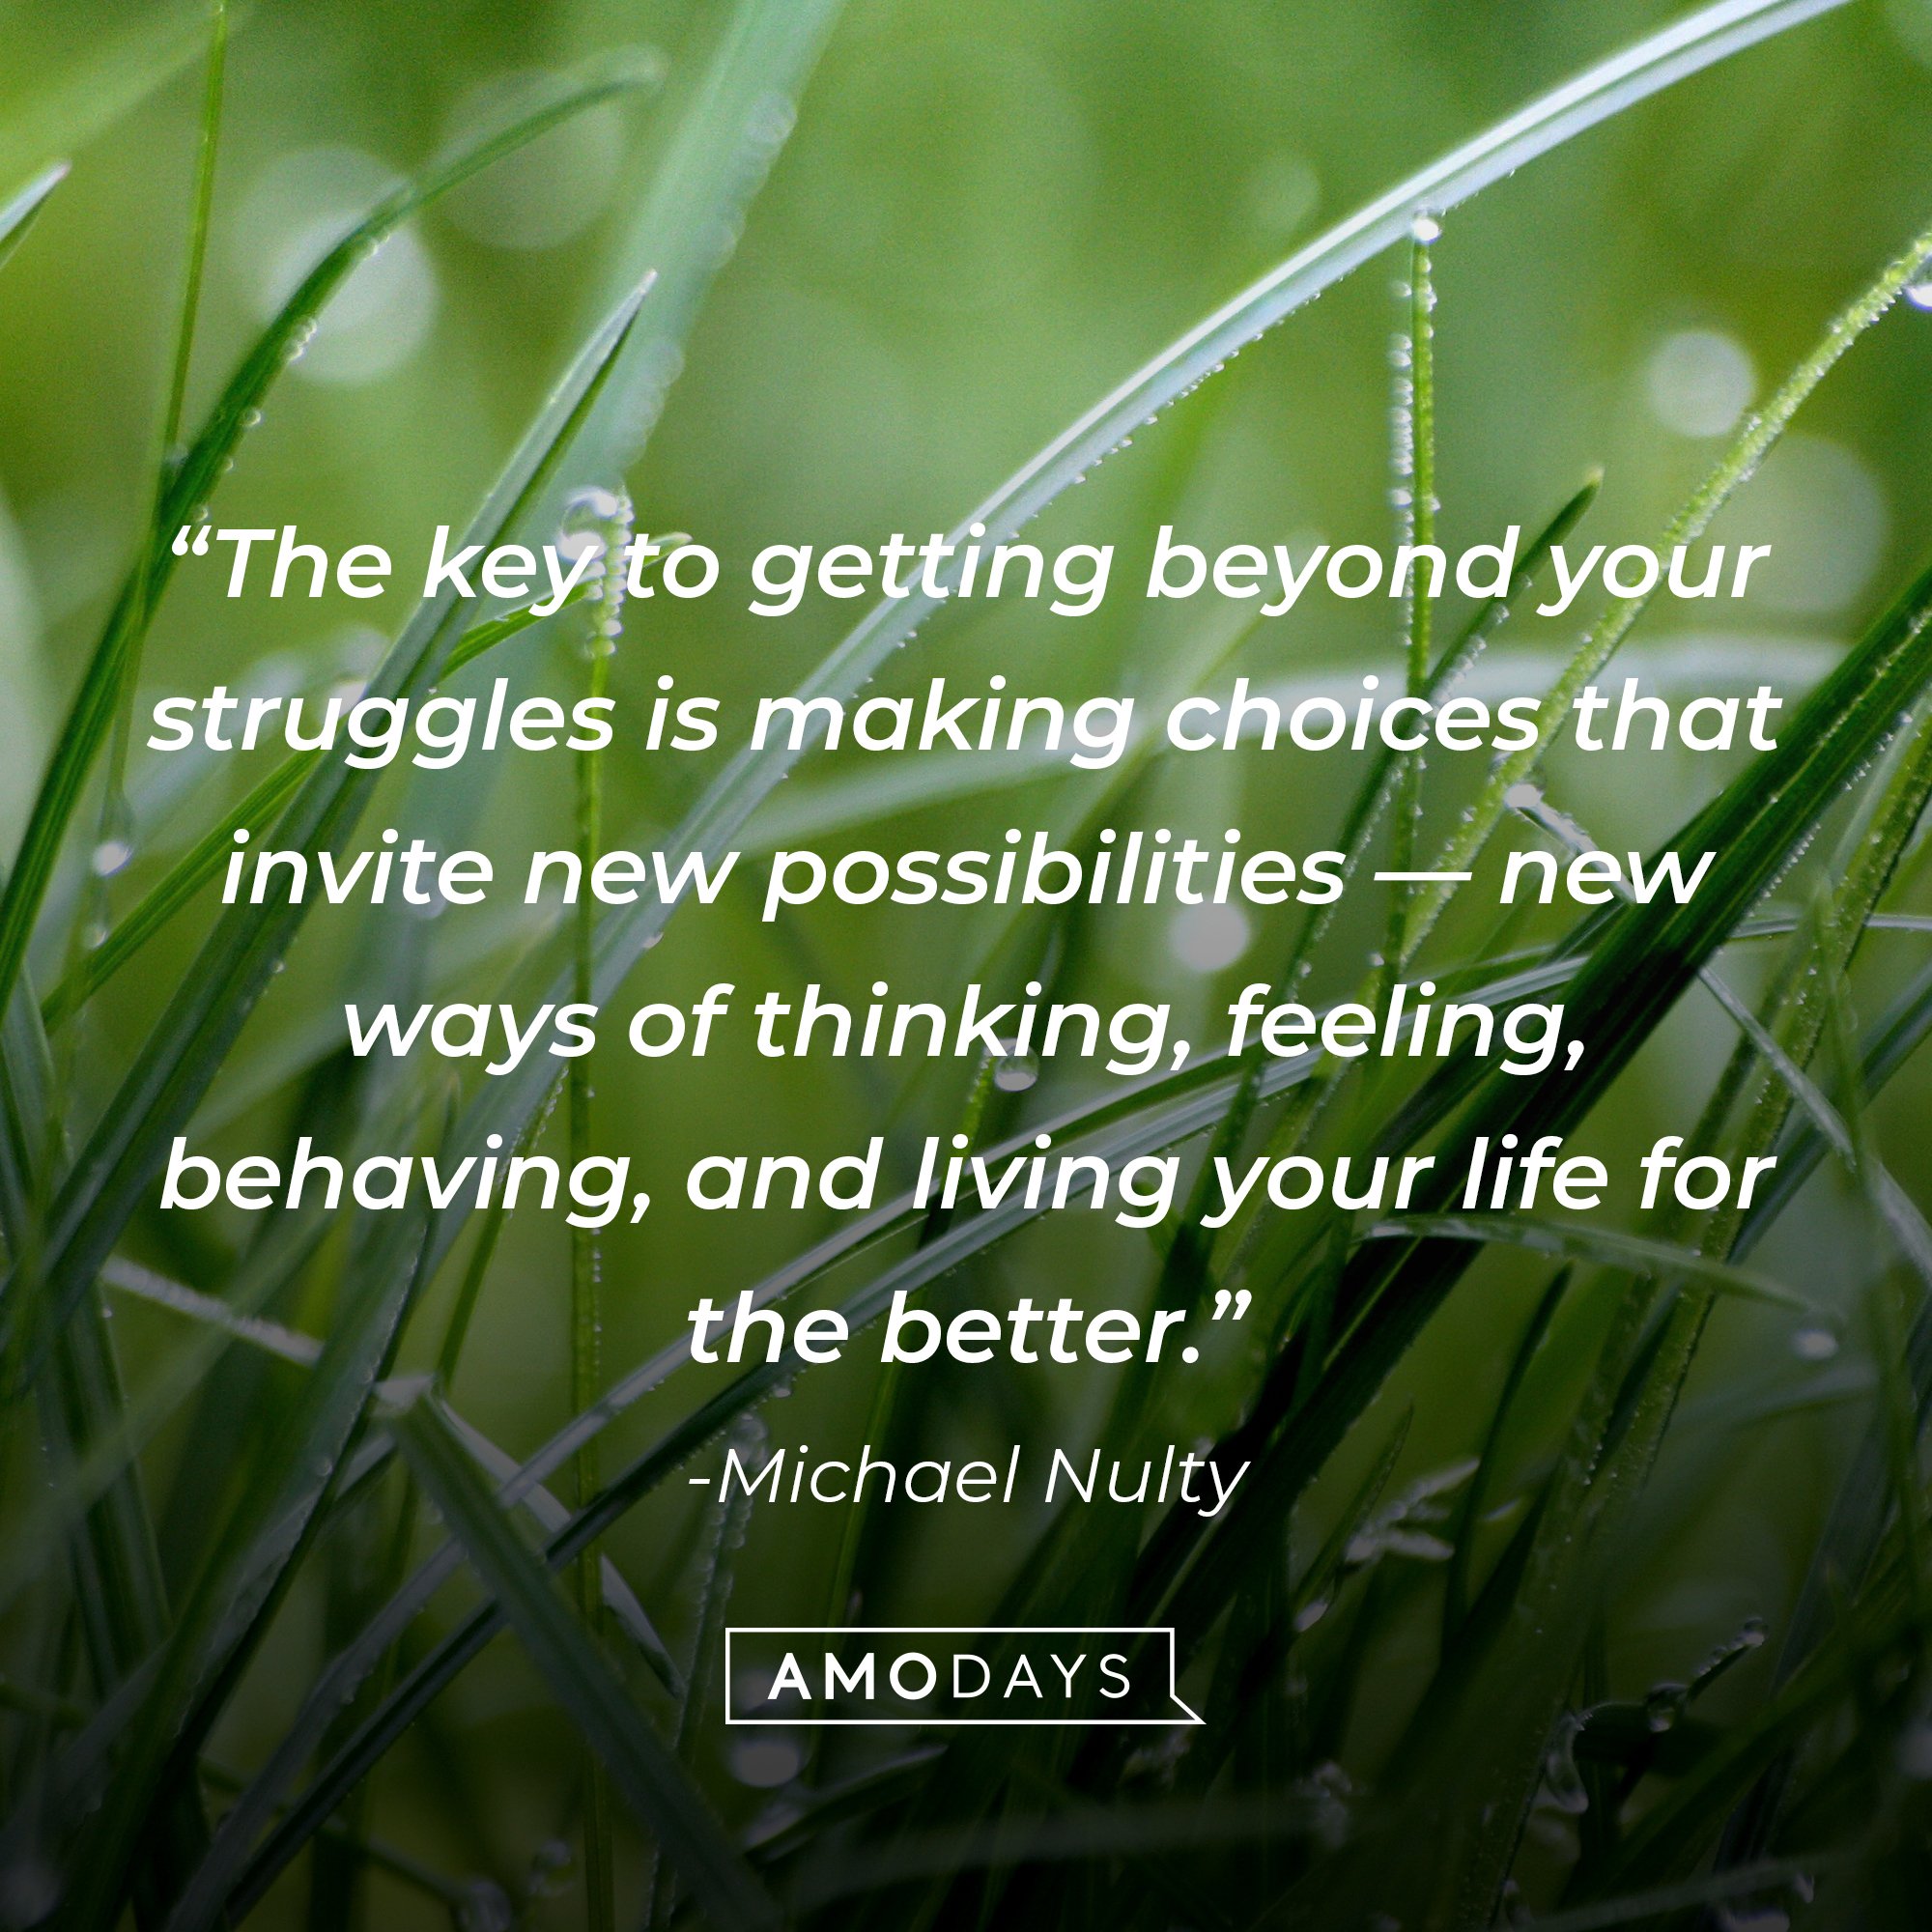 Michael Nulty's quote: “The key to getting beyond your struggles is making choices that invite new possibilities — new ways of thinking, feeling, behaving, and living your life for the better.” | Image: AmoDays